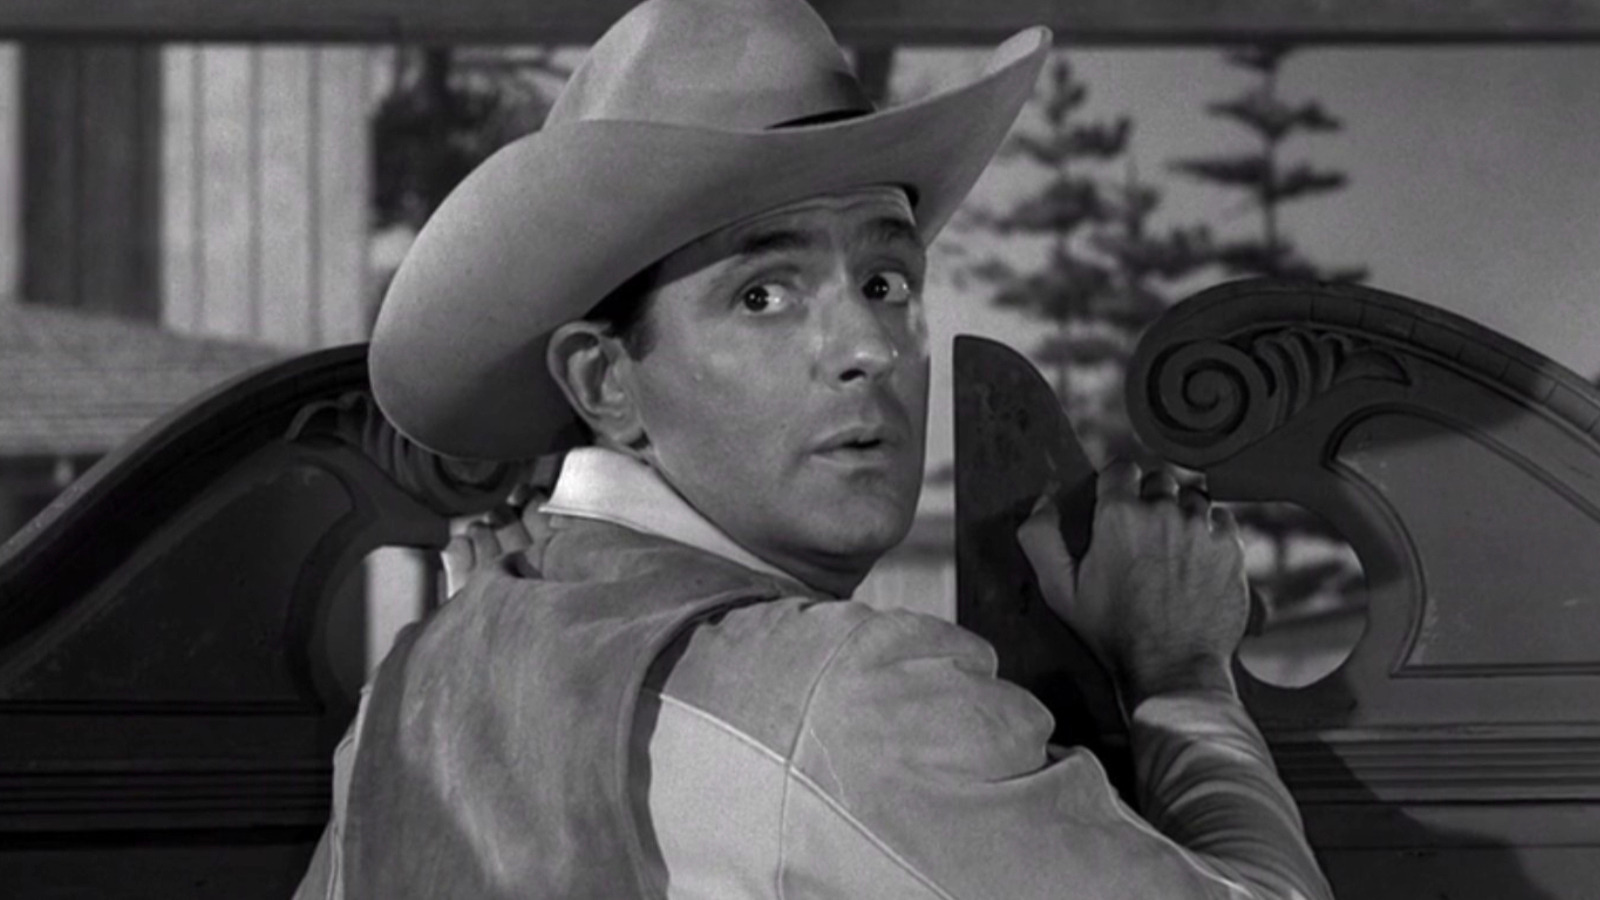 This Episode Of The Twilight Zone Was A Harsh Critique Of Hollywood Westerns